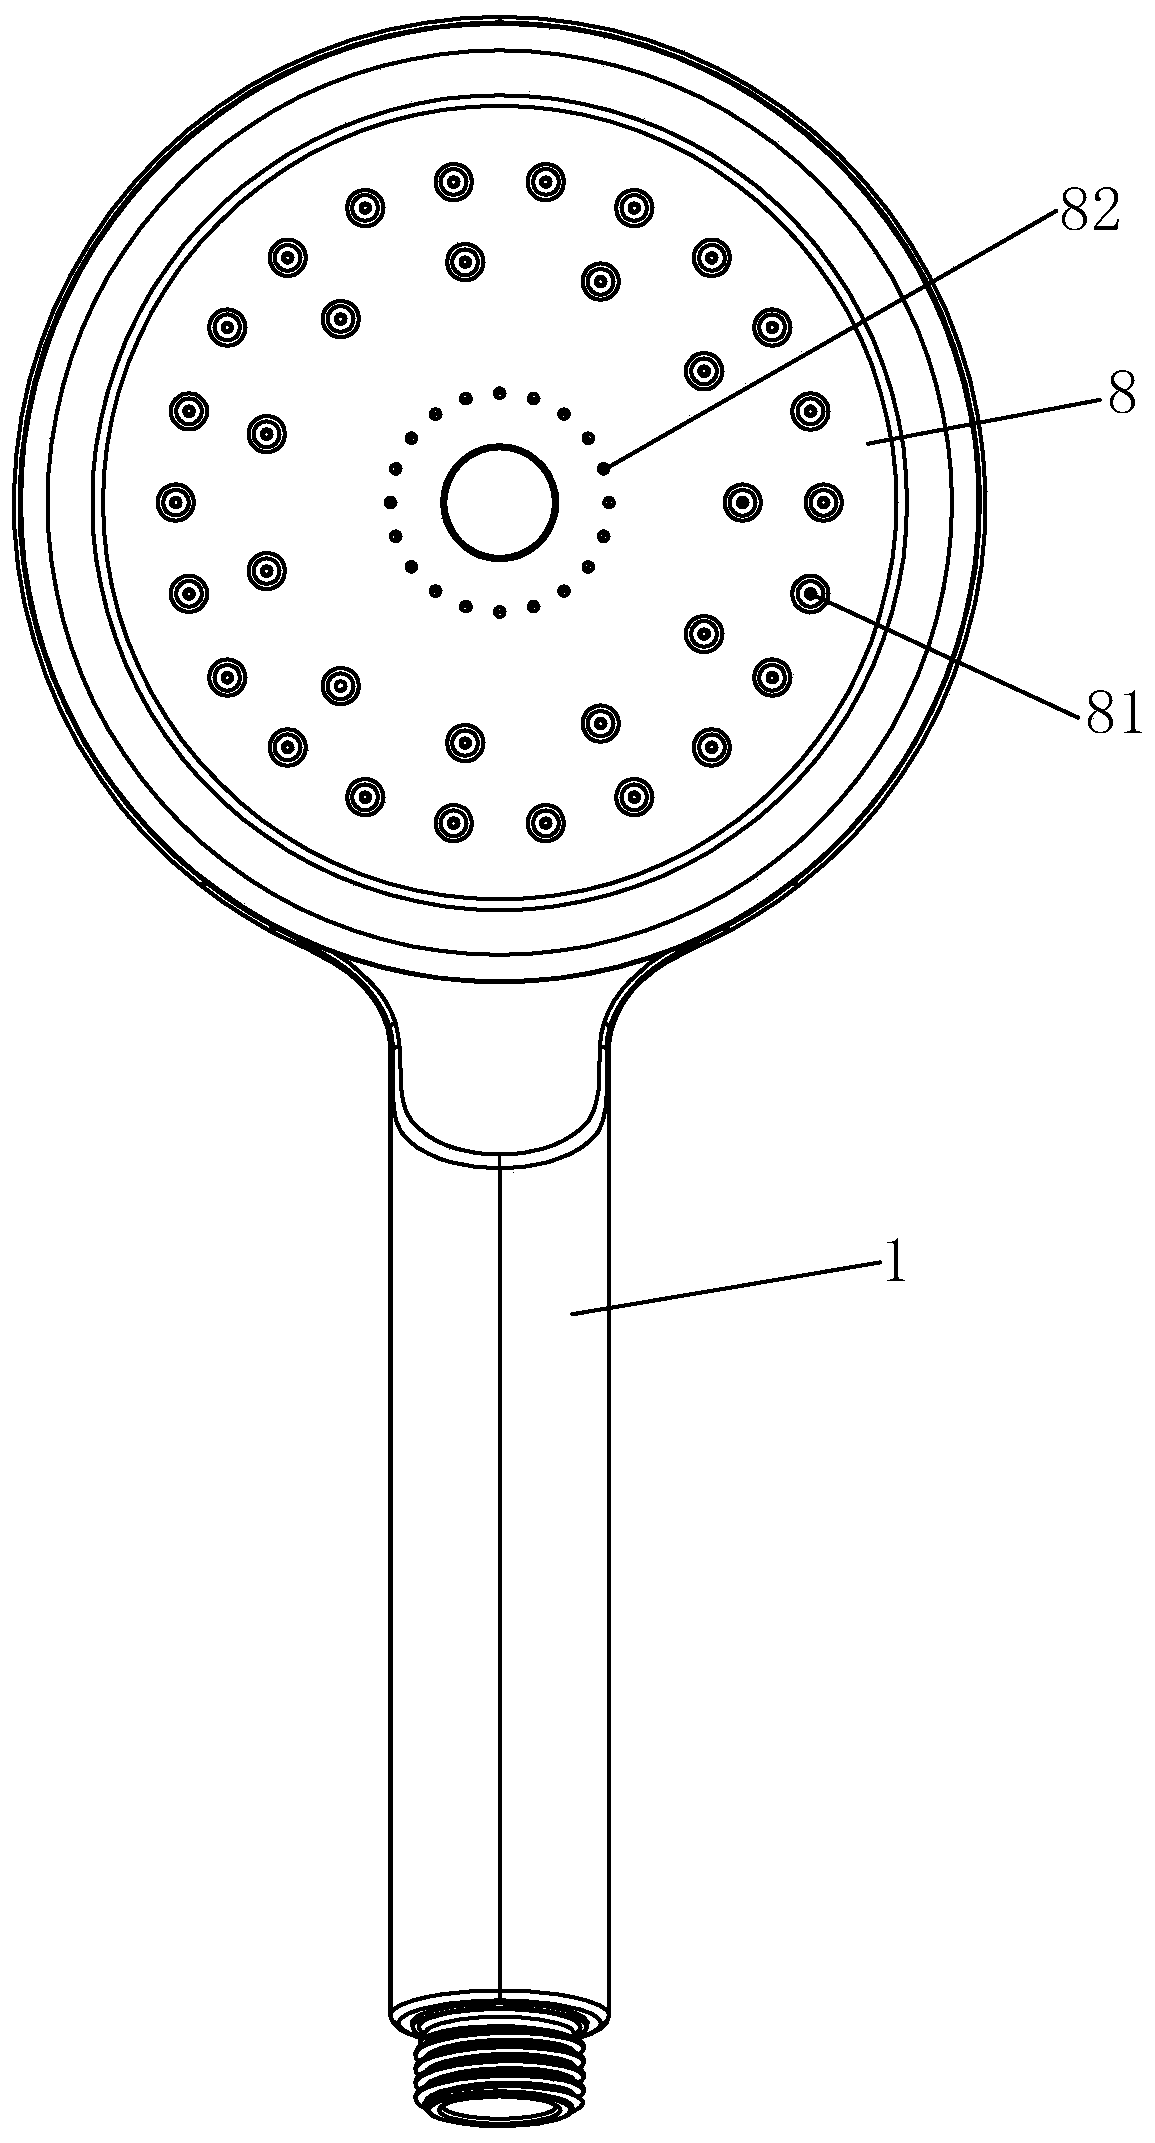 Descaling shower head with automatic drainage function